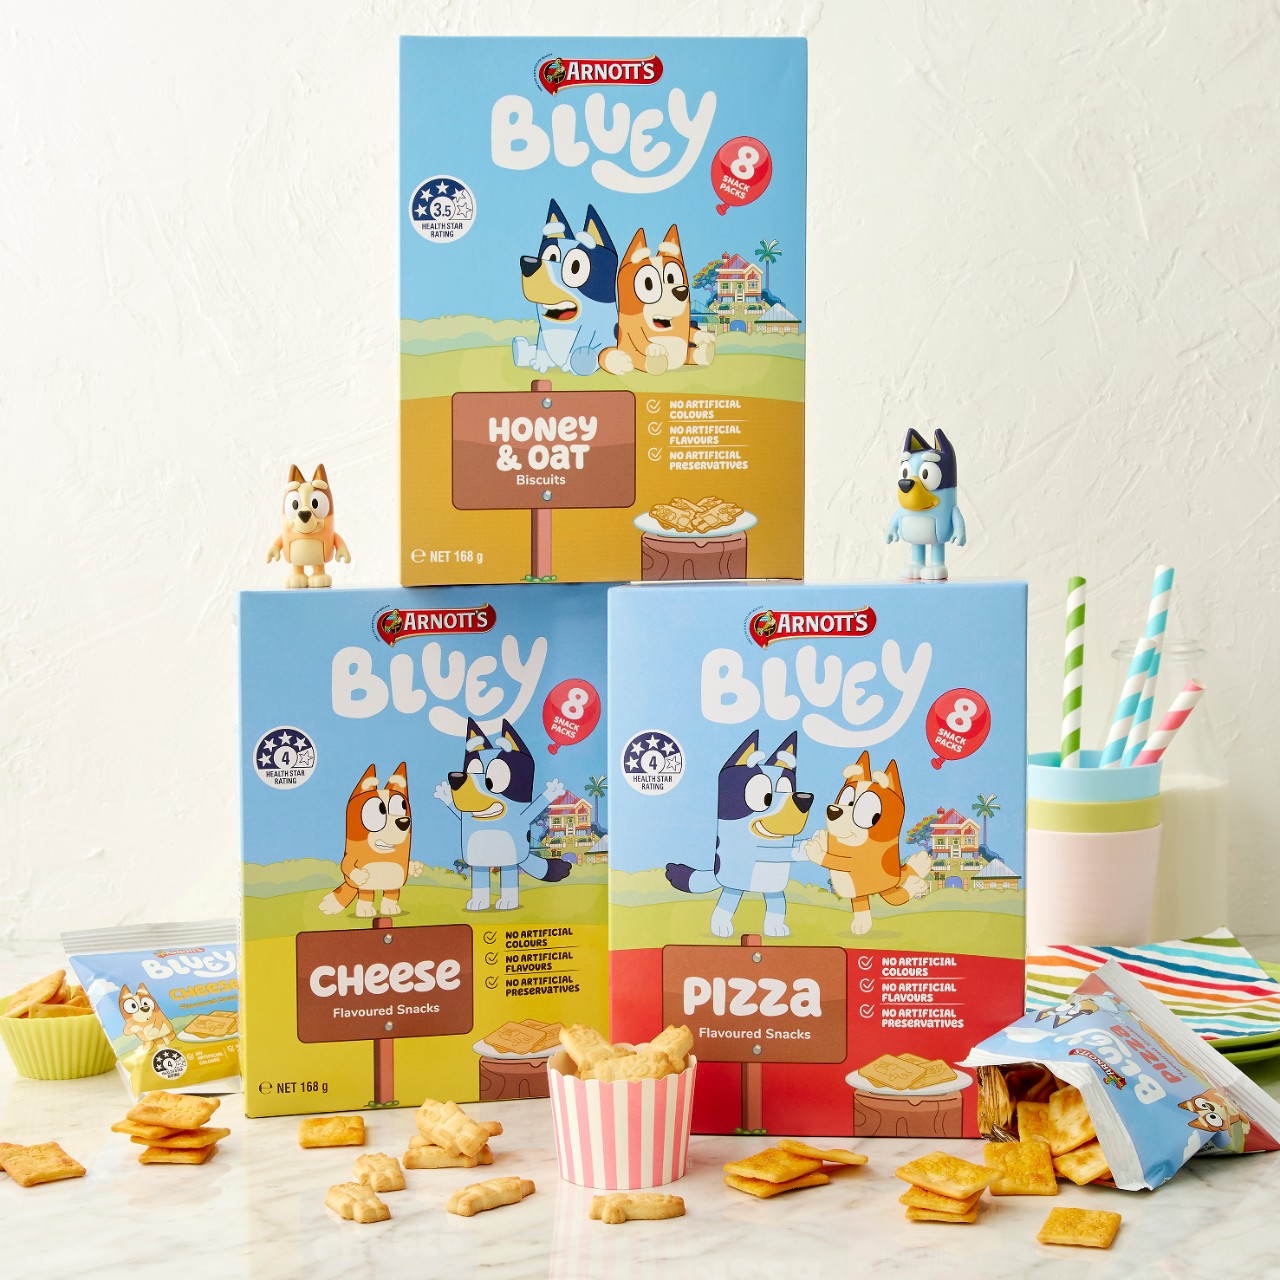 Arnott's releases new 'Bluey' biscuits 